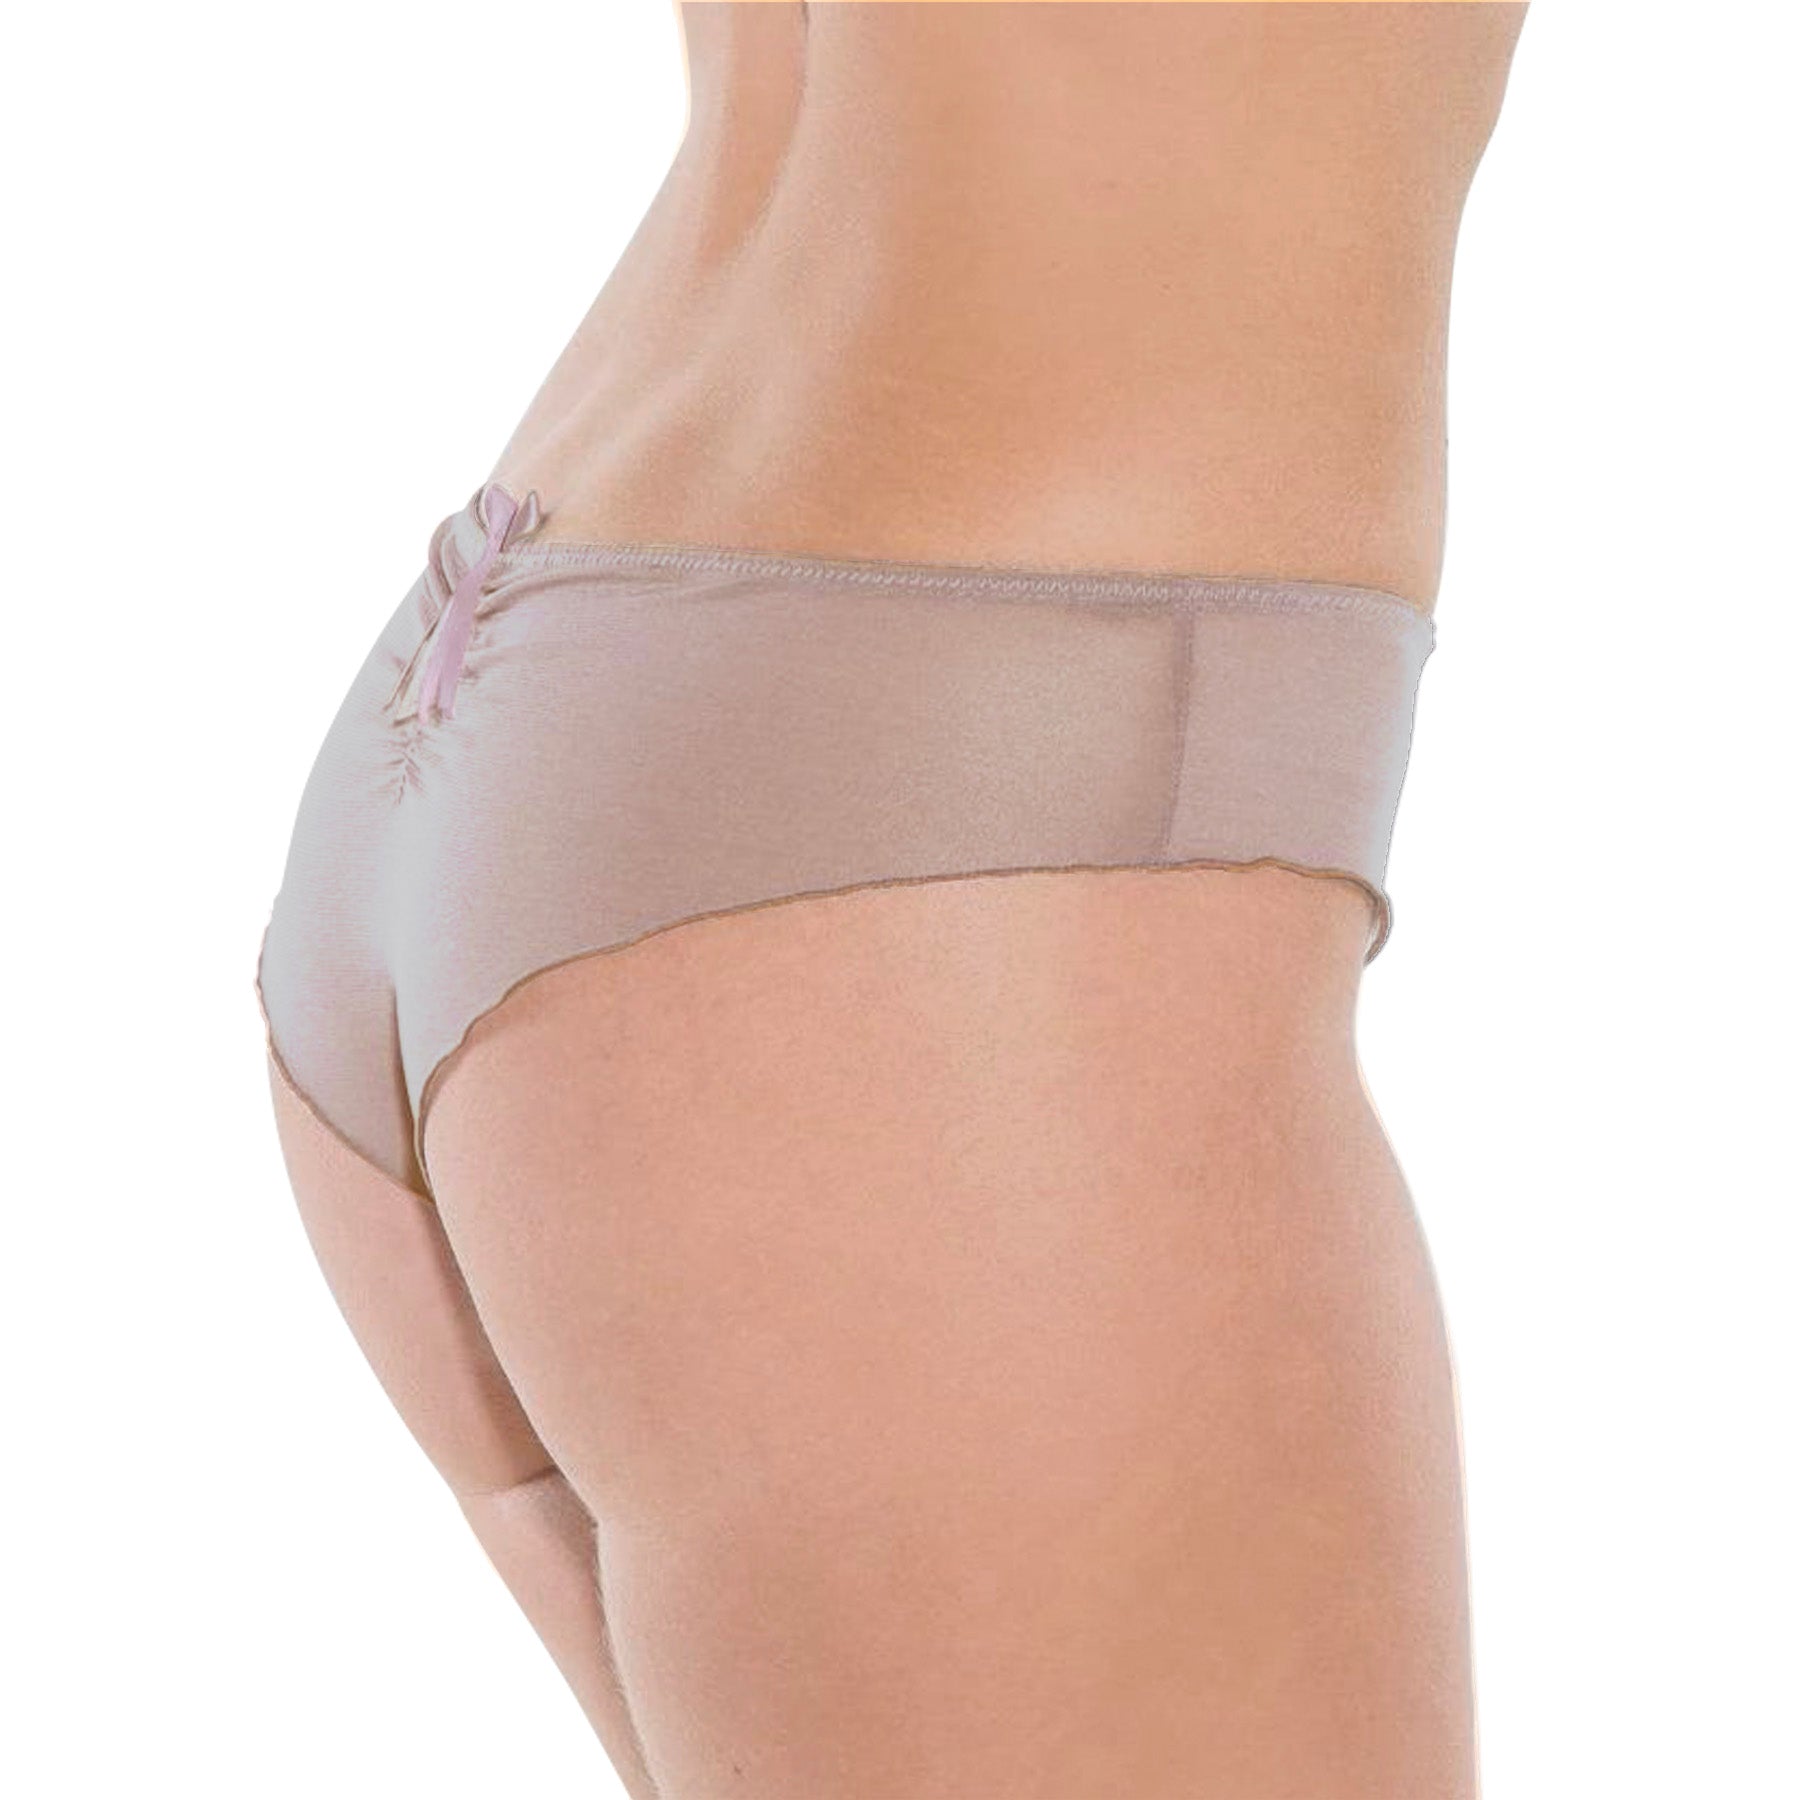 Fit Fully Yours Nicole Tanga U2275 Cloud Pink Rear View